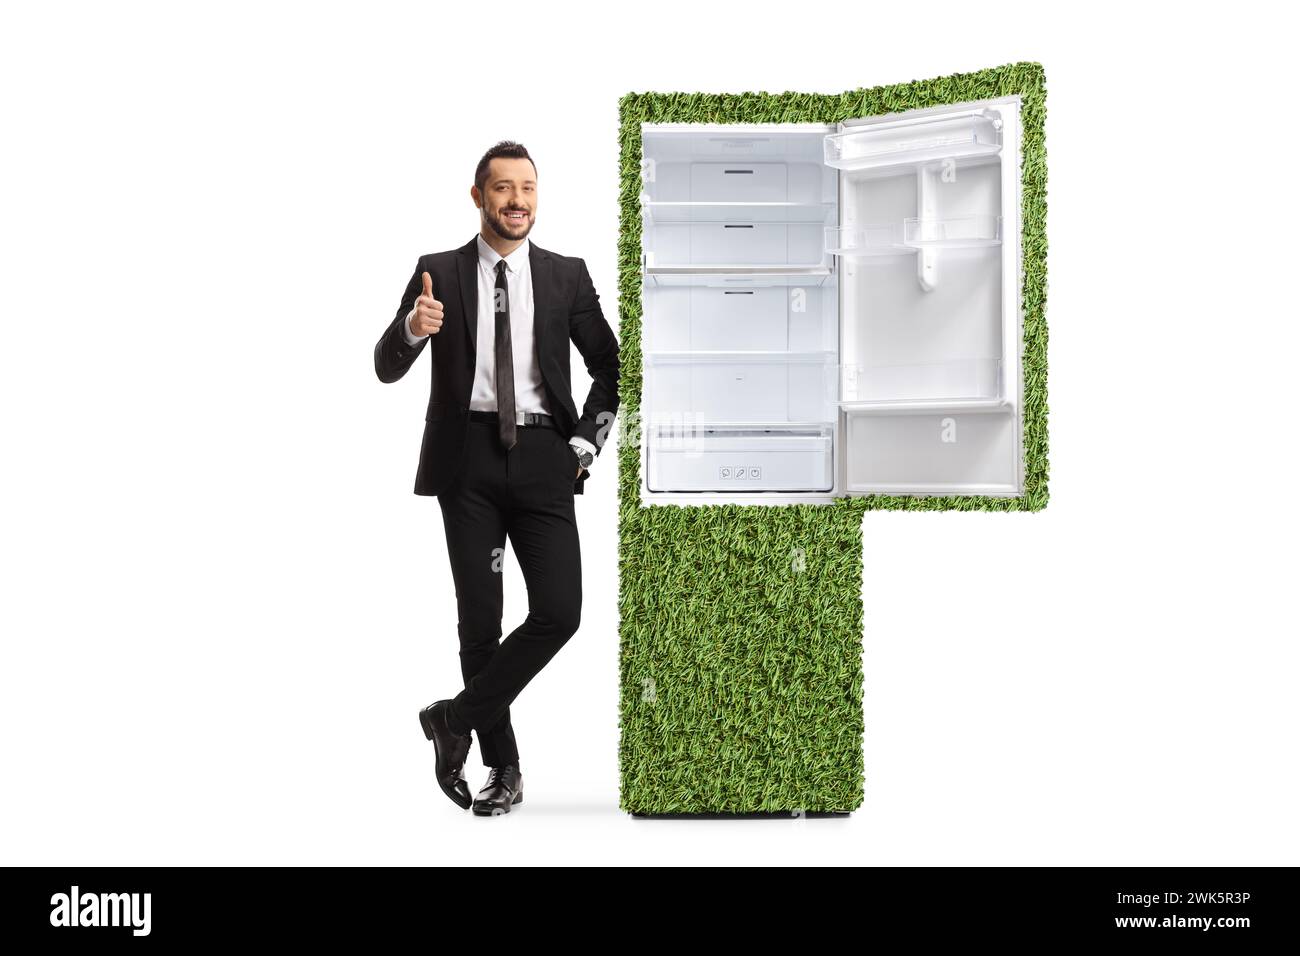 Full length portrait of a salesman with a green eco friendly fridge gesturing thumbs up isolated on white background Stock Photo